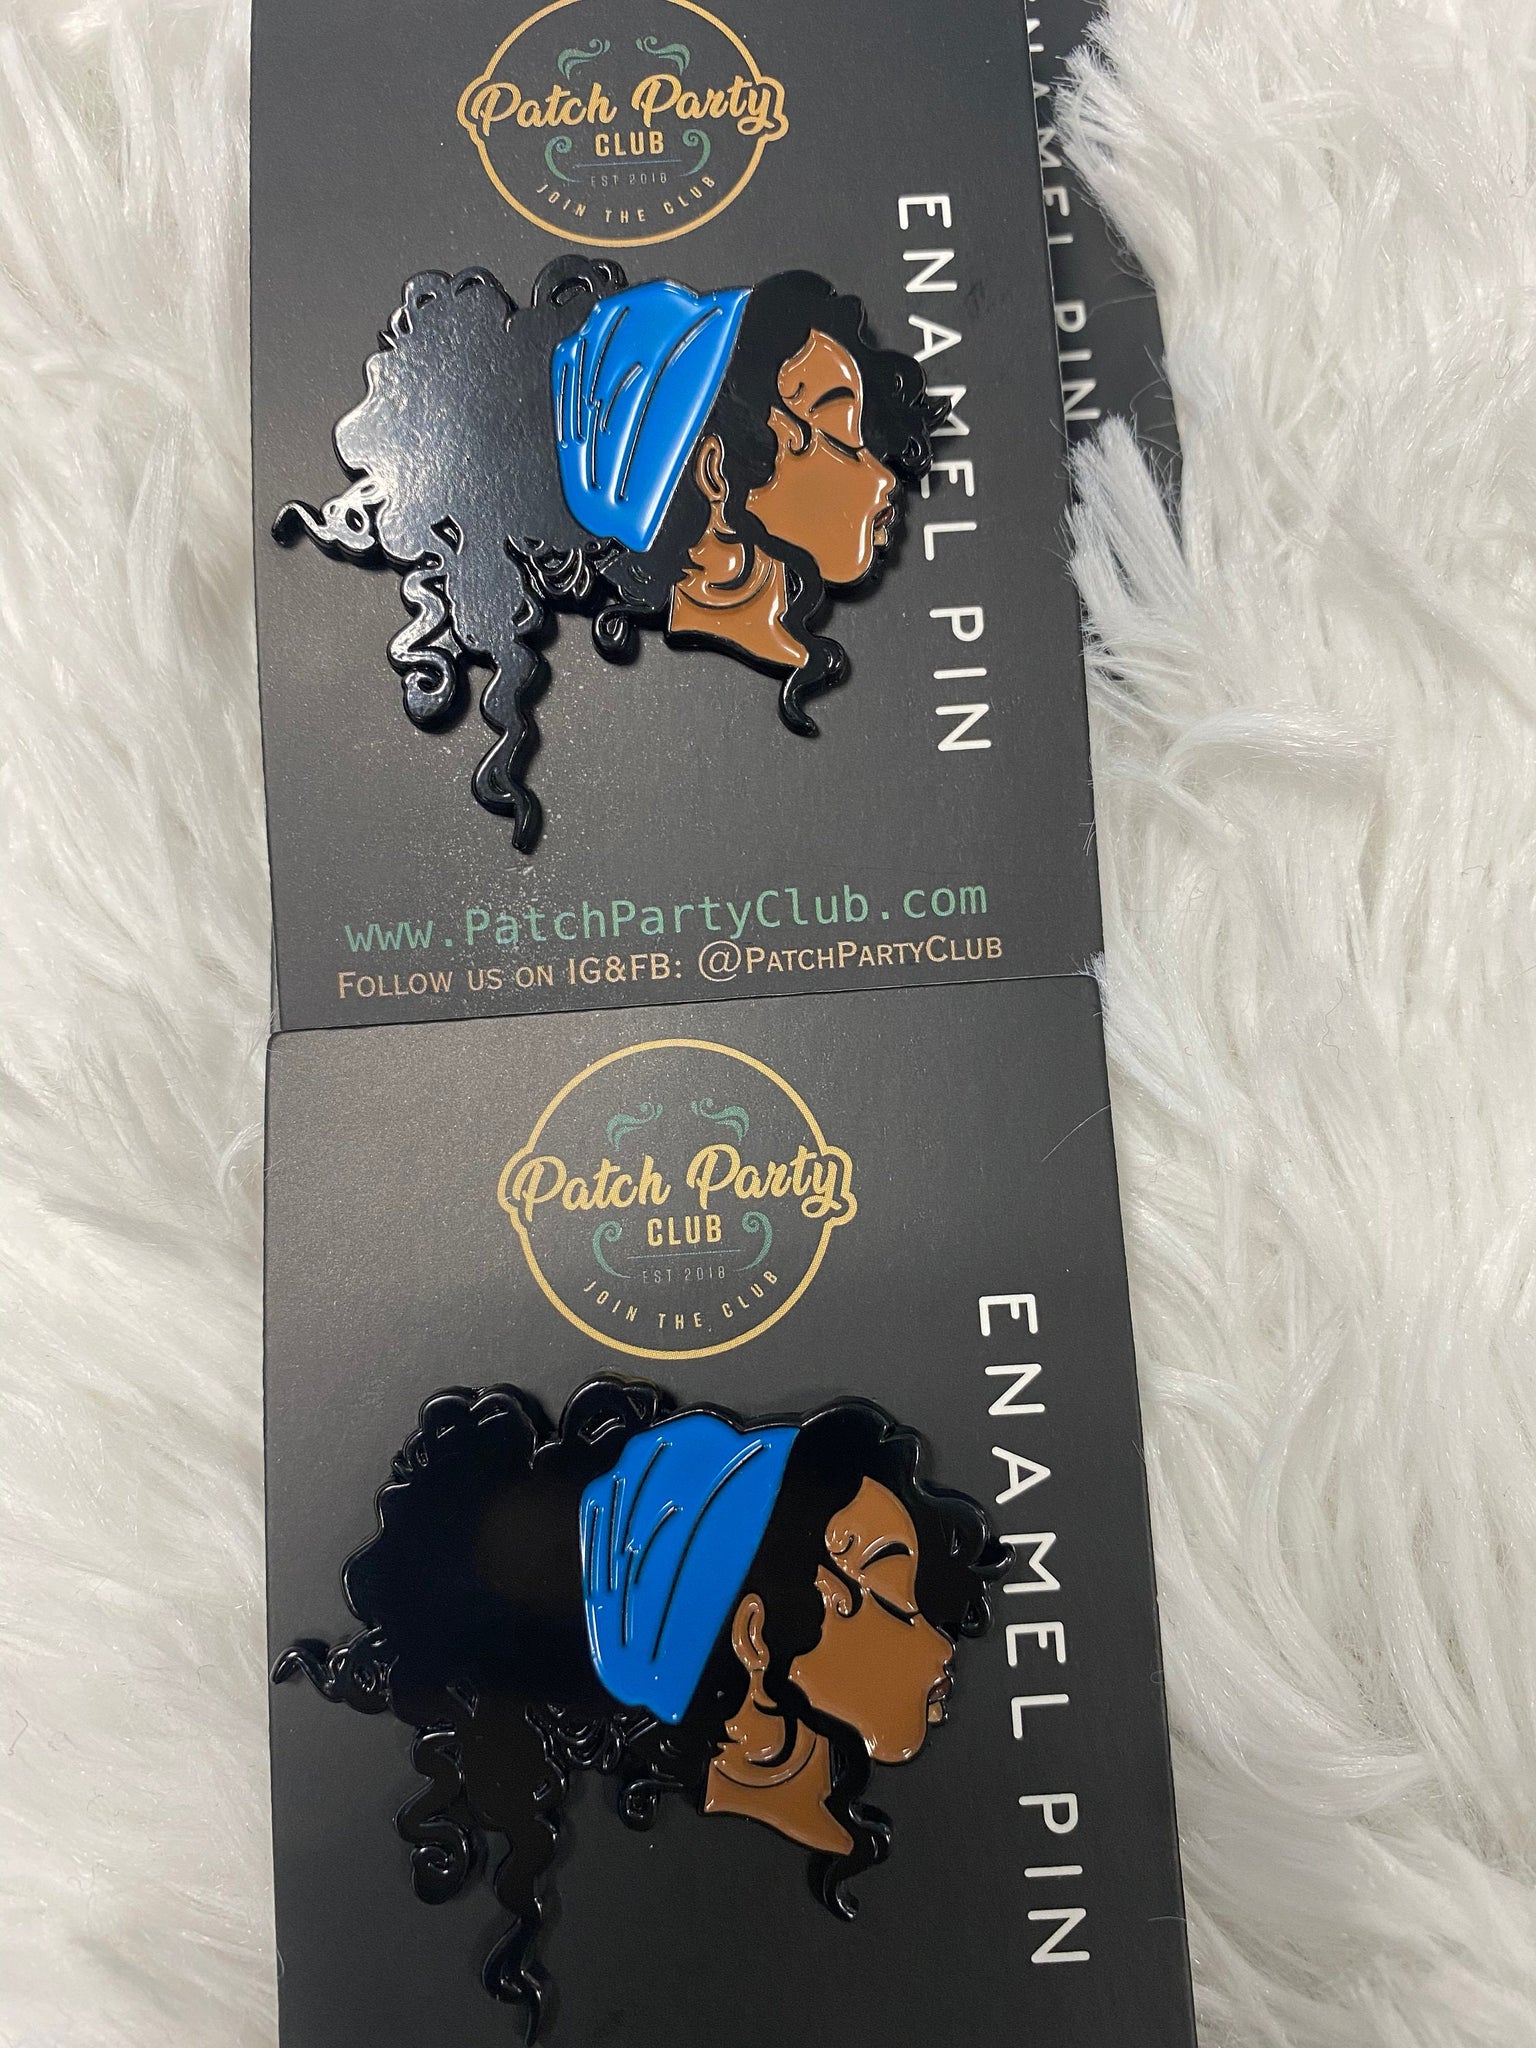 NEW, Enamel Pin "Fly Nubian Headwrap" Exclusive Lapel Pin, Popular Enamel Pins, Size 1.77 inches, w/Butterfly Clutch, Cool Pin For Apparel